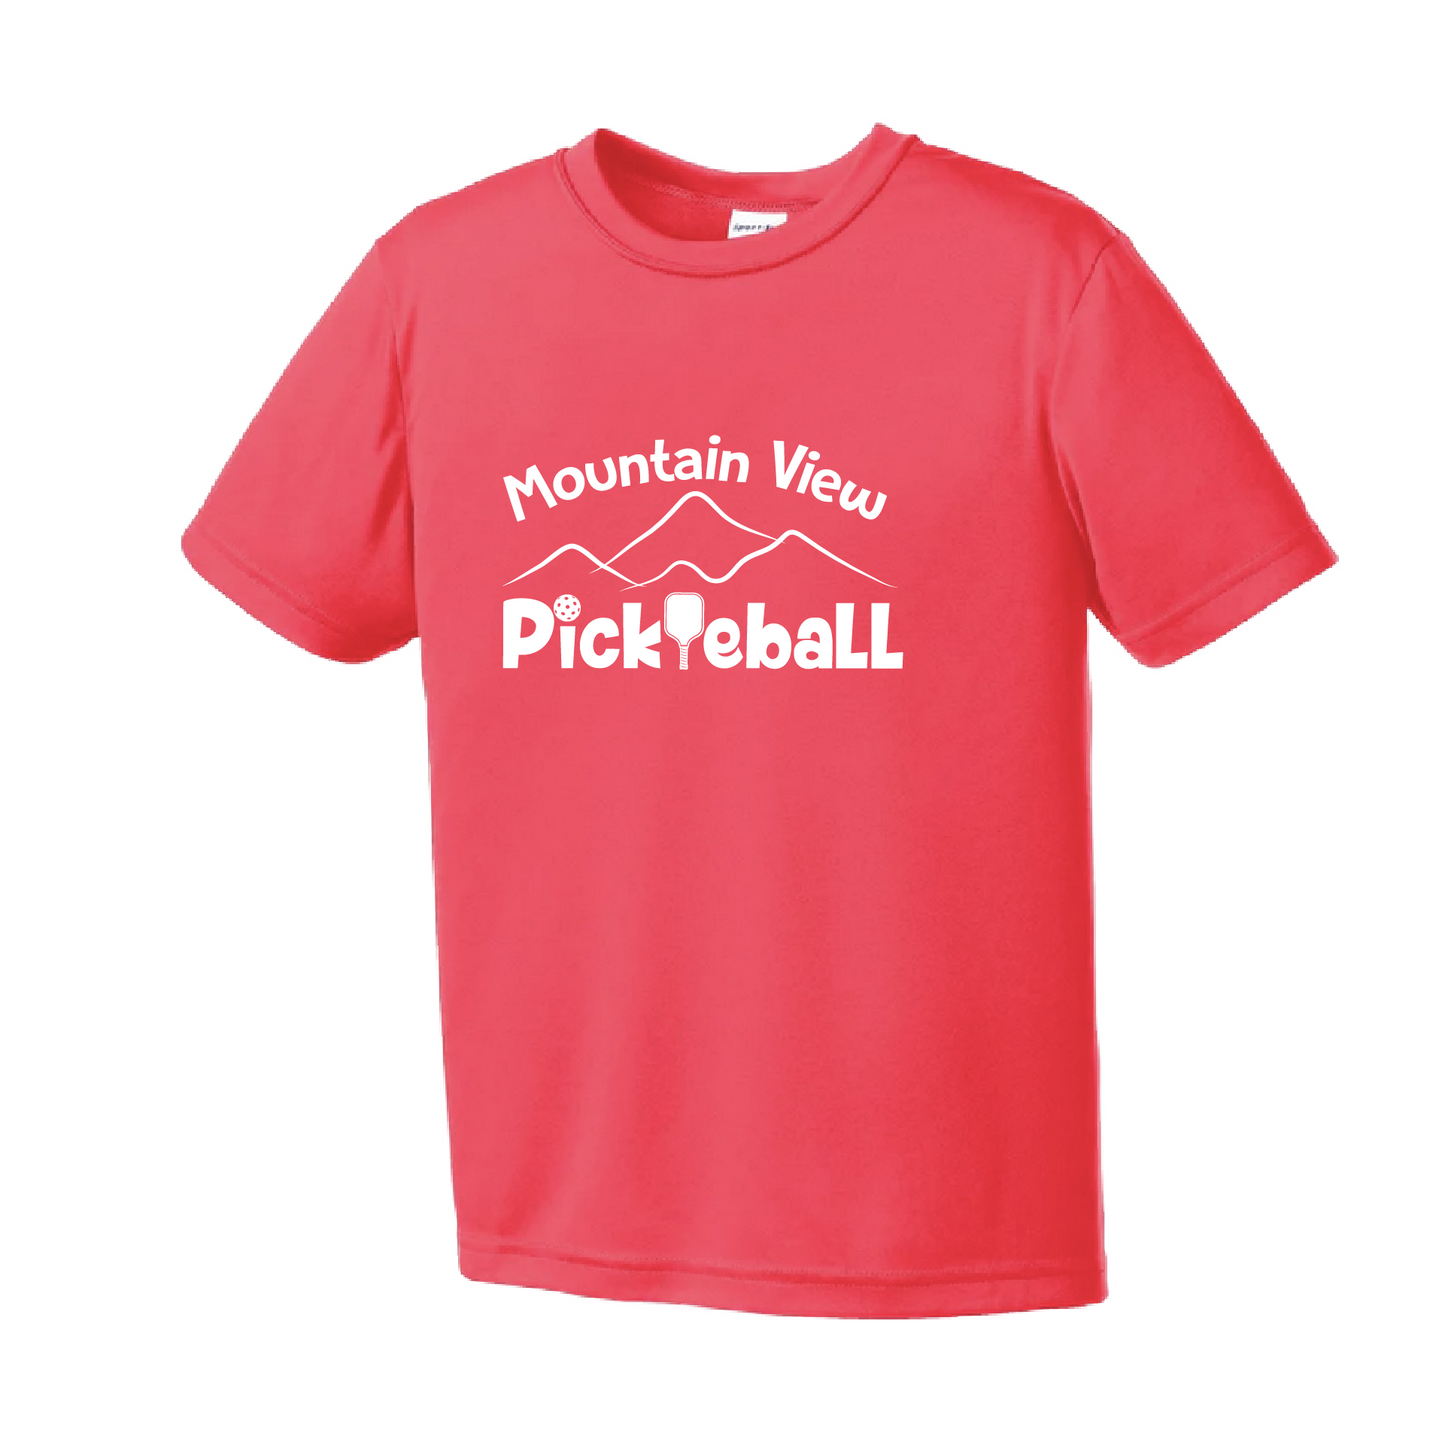 Pickleball Design: Mountain View Pickleball Club  Youth Styles: Short Sleeve  Shirt are lightweight, roomy and highly breathable. These moisture-wicking shirts are designed for athletic performance. They feature PosiCharge technology to lock in color and prevent logos from fading. Removable tag and set-in sleeves for comfort. 